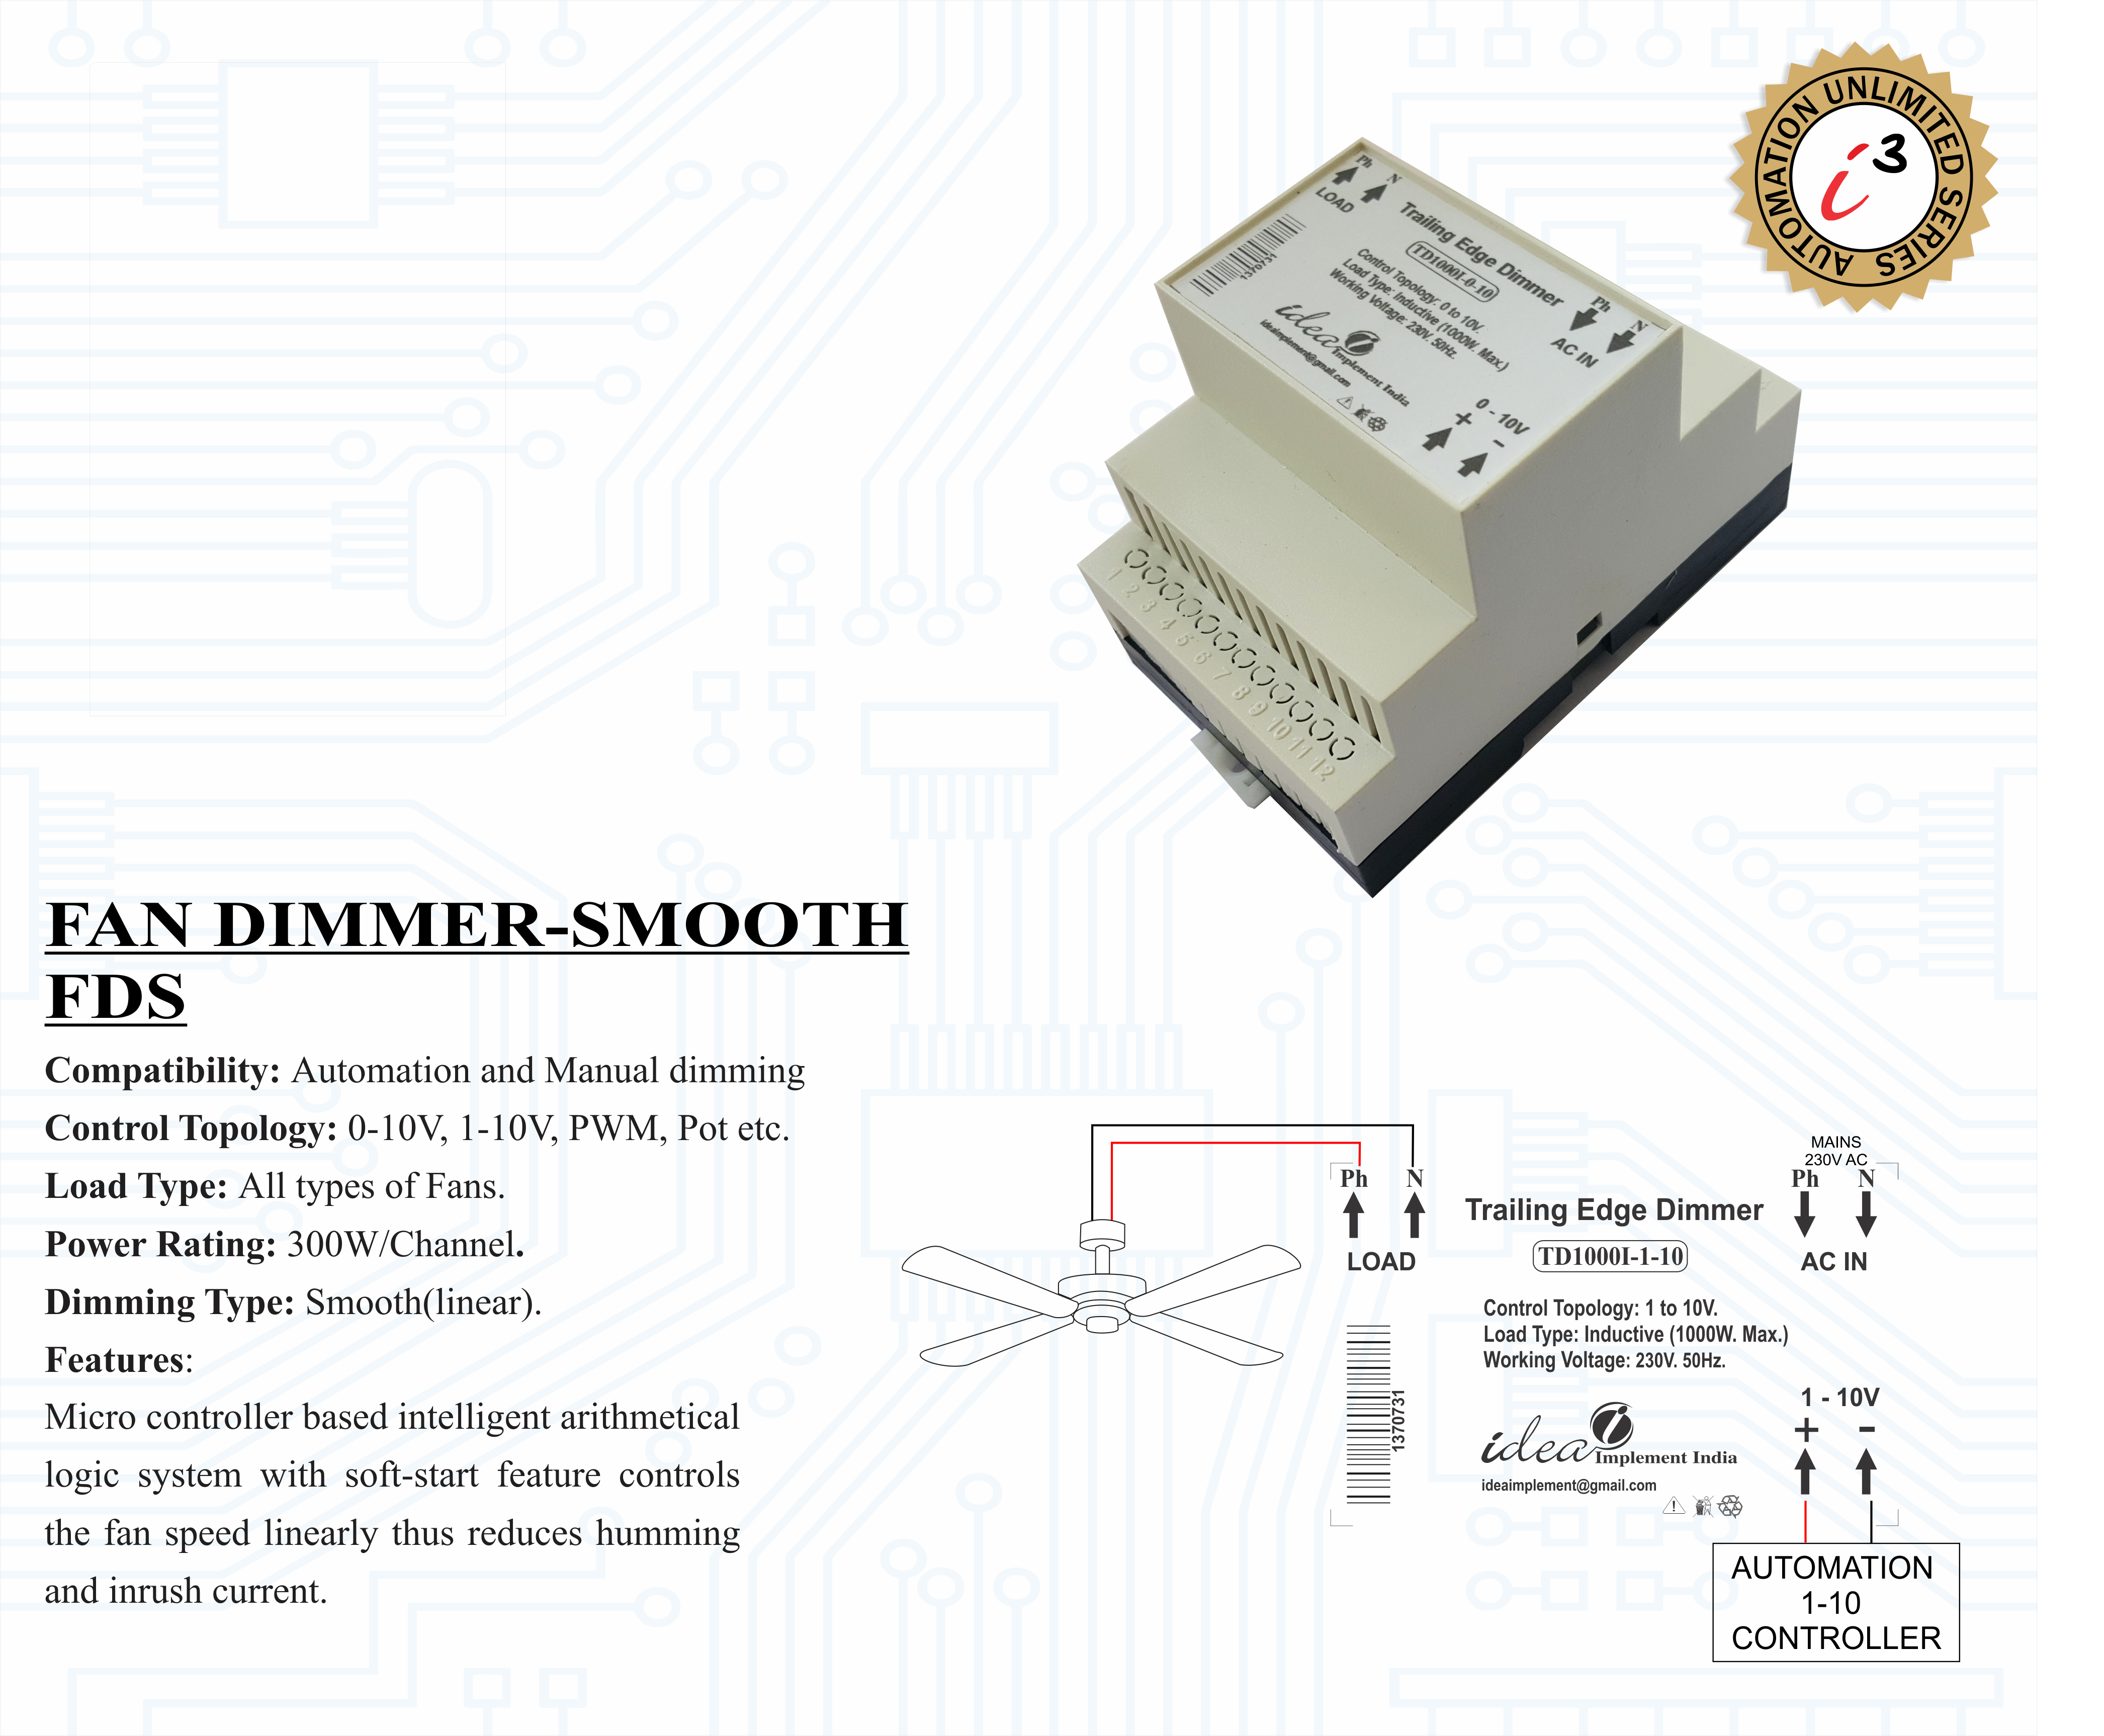 FAN DIMMER-SMOOTH FDS